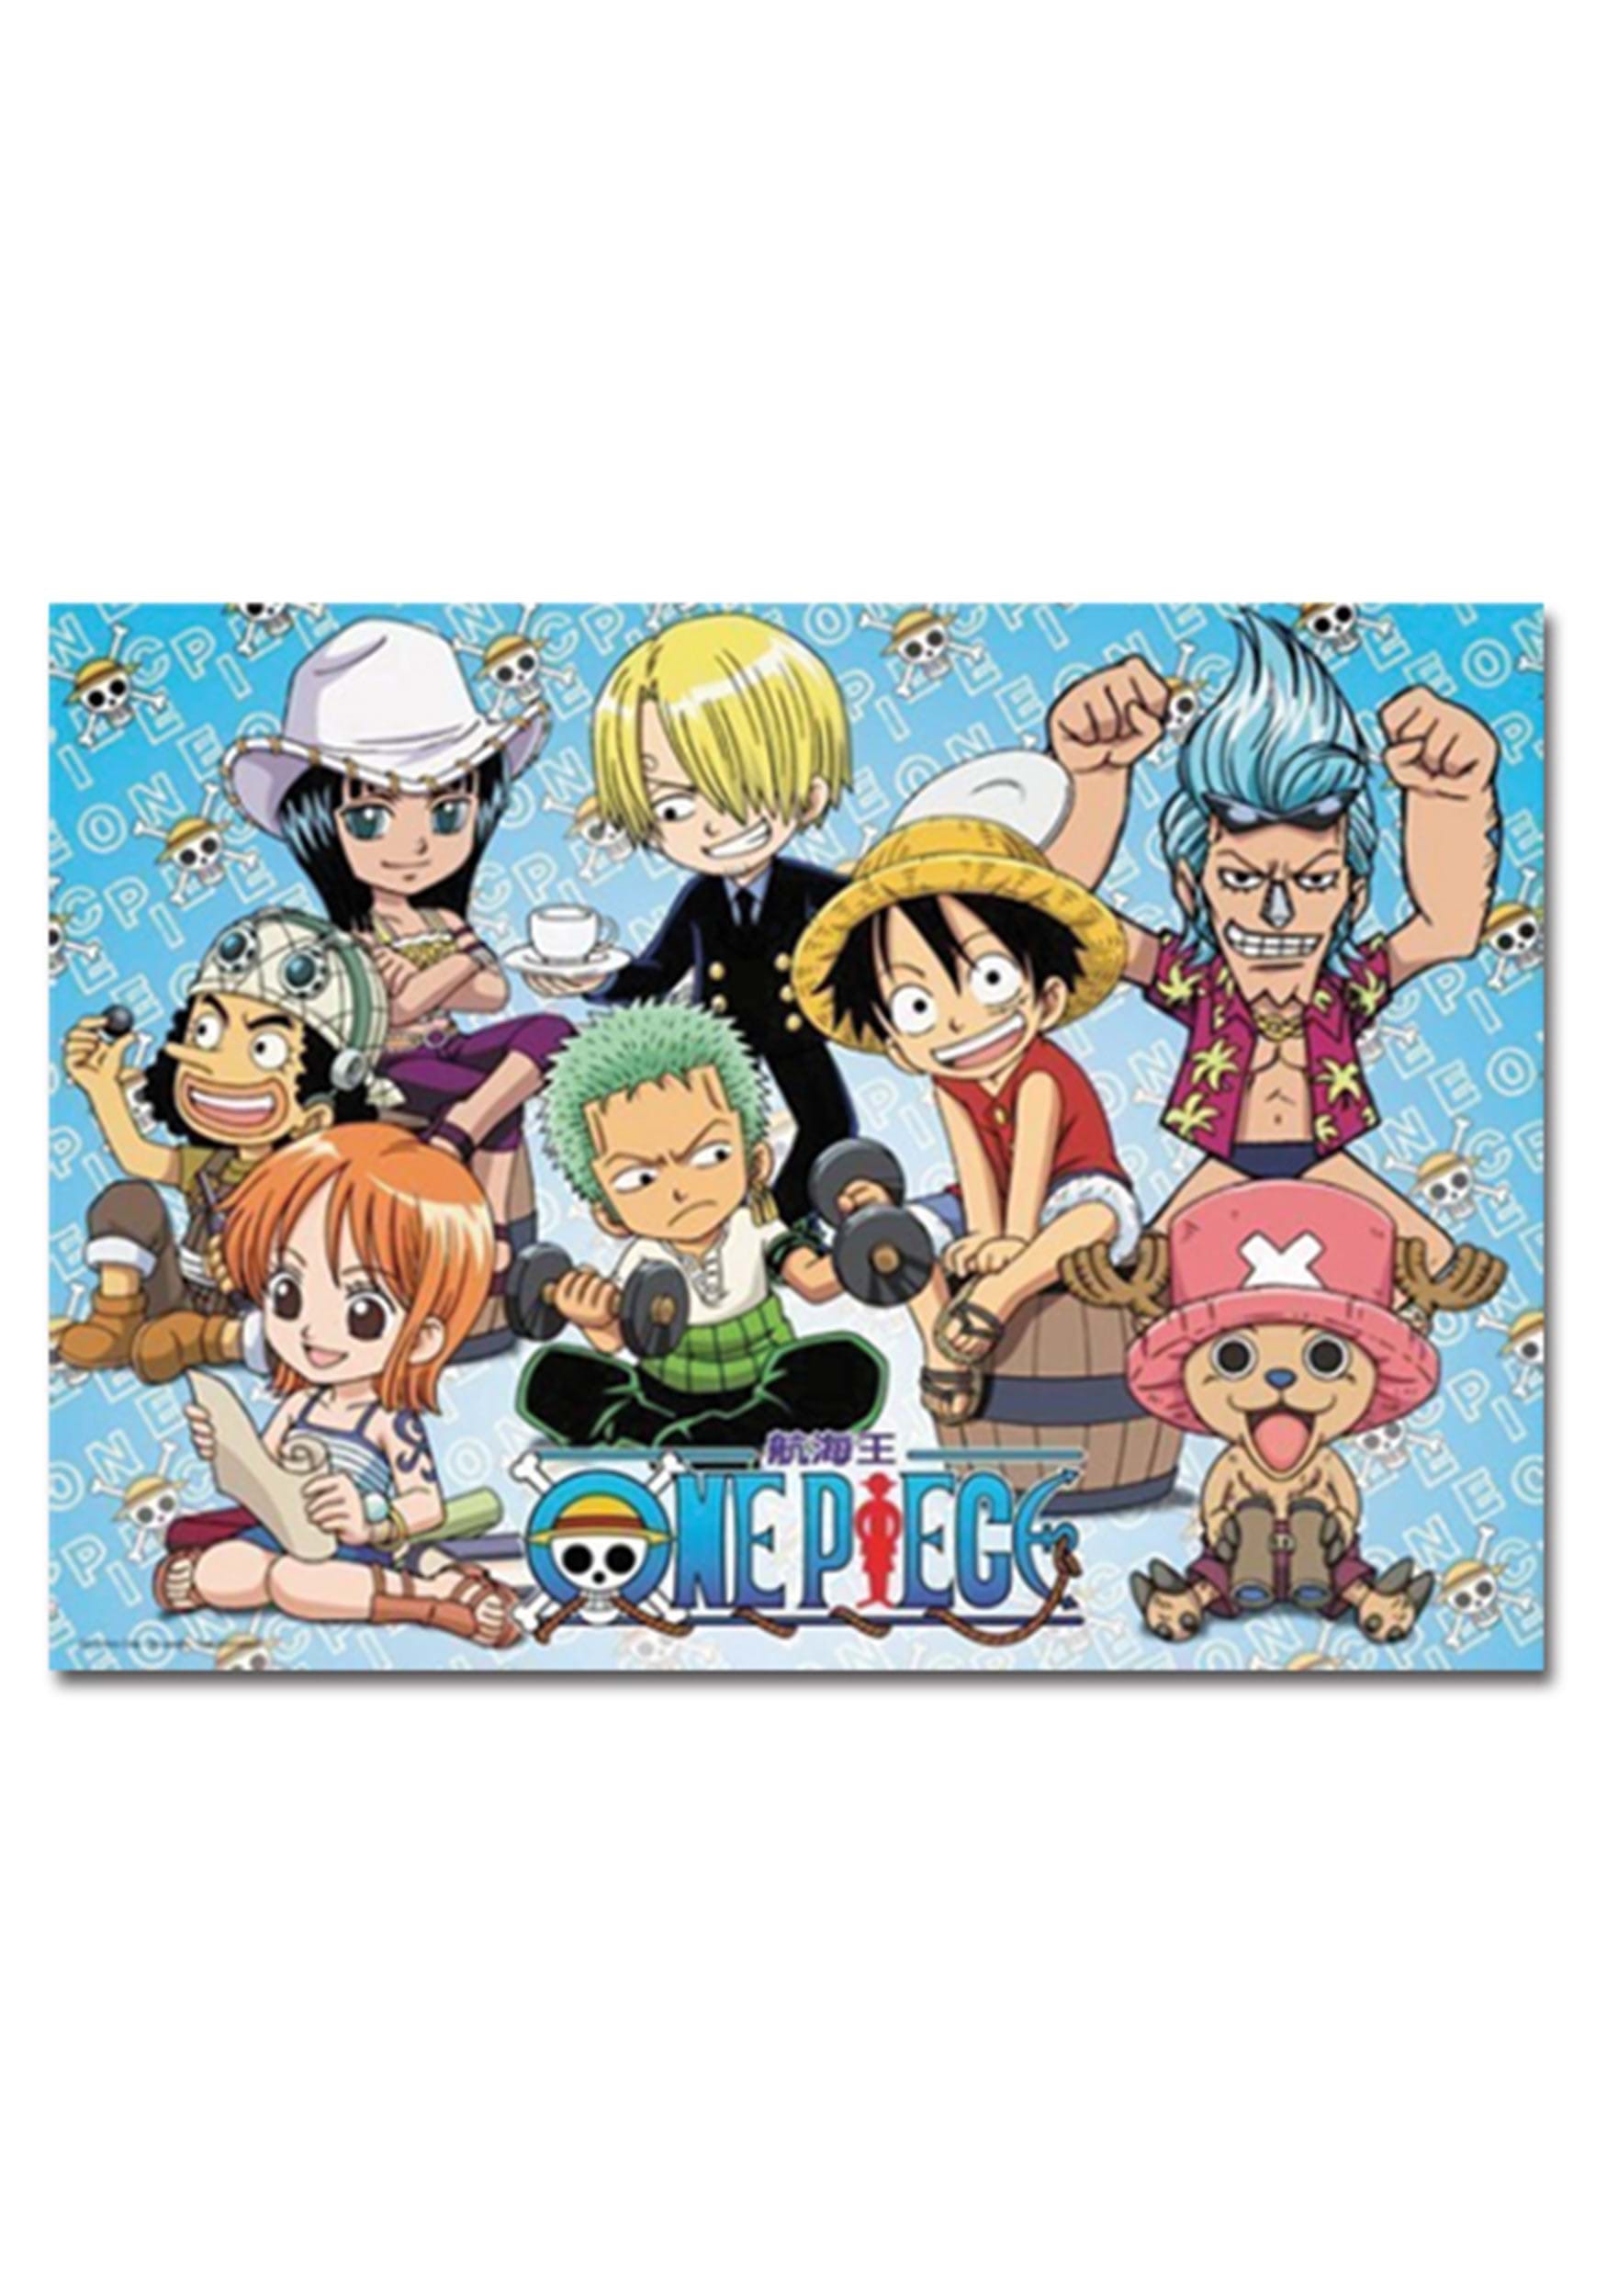 Water 7 Group 300 pcs Puzzle from One Piece